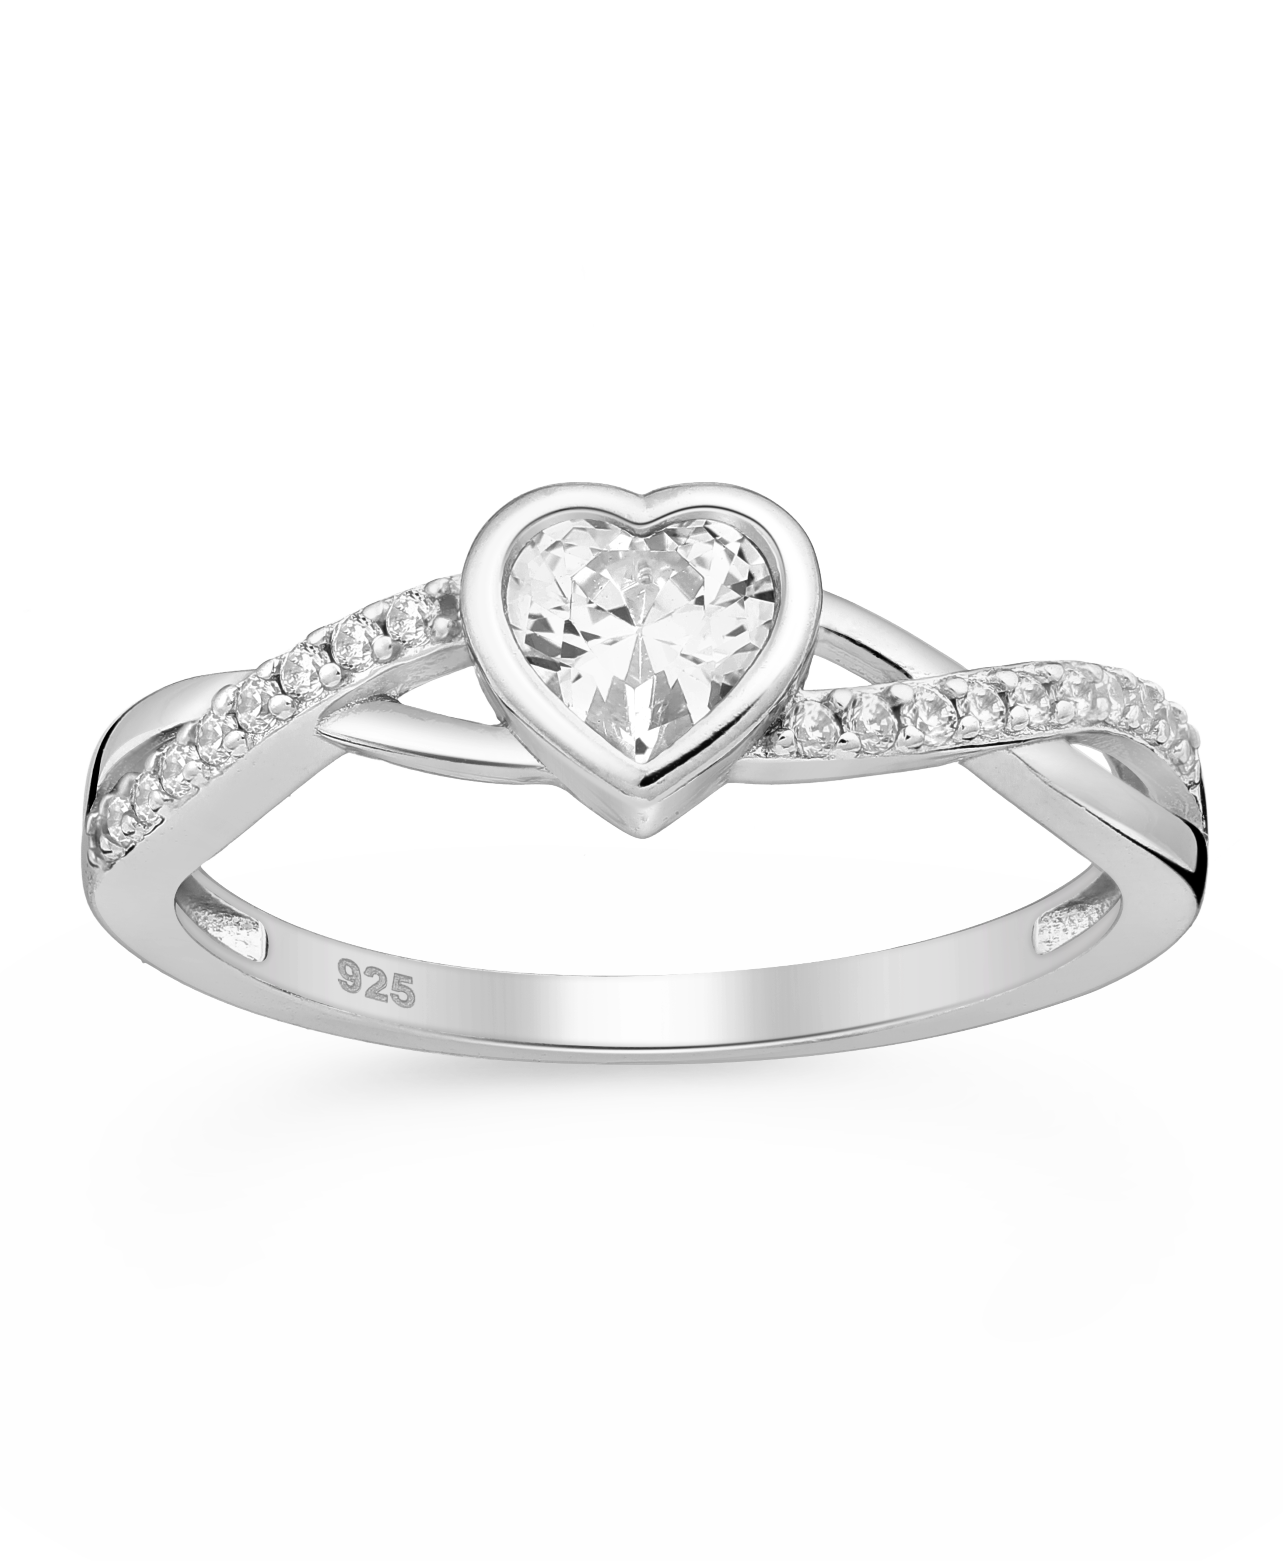 Sparkle By Princess Andre: Sterling Silver Heart CZ Simulated Diamonds Ring